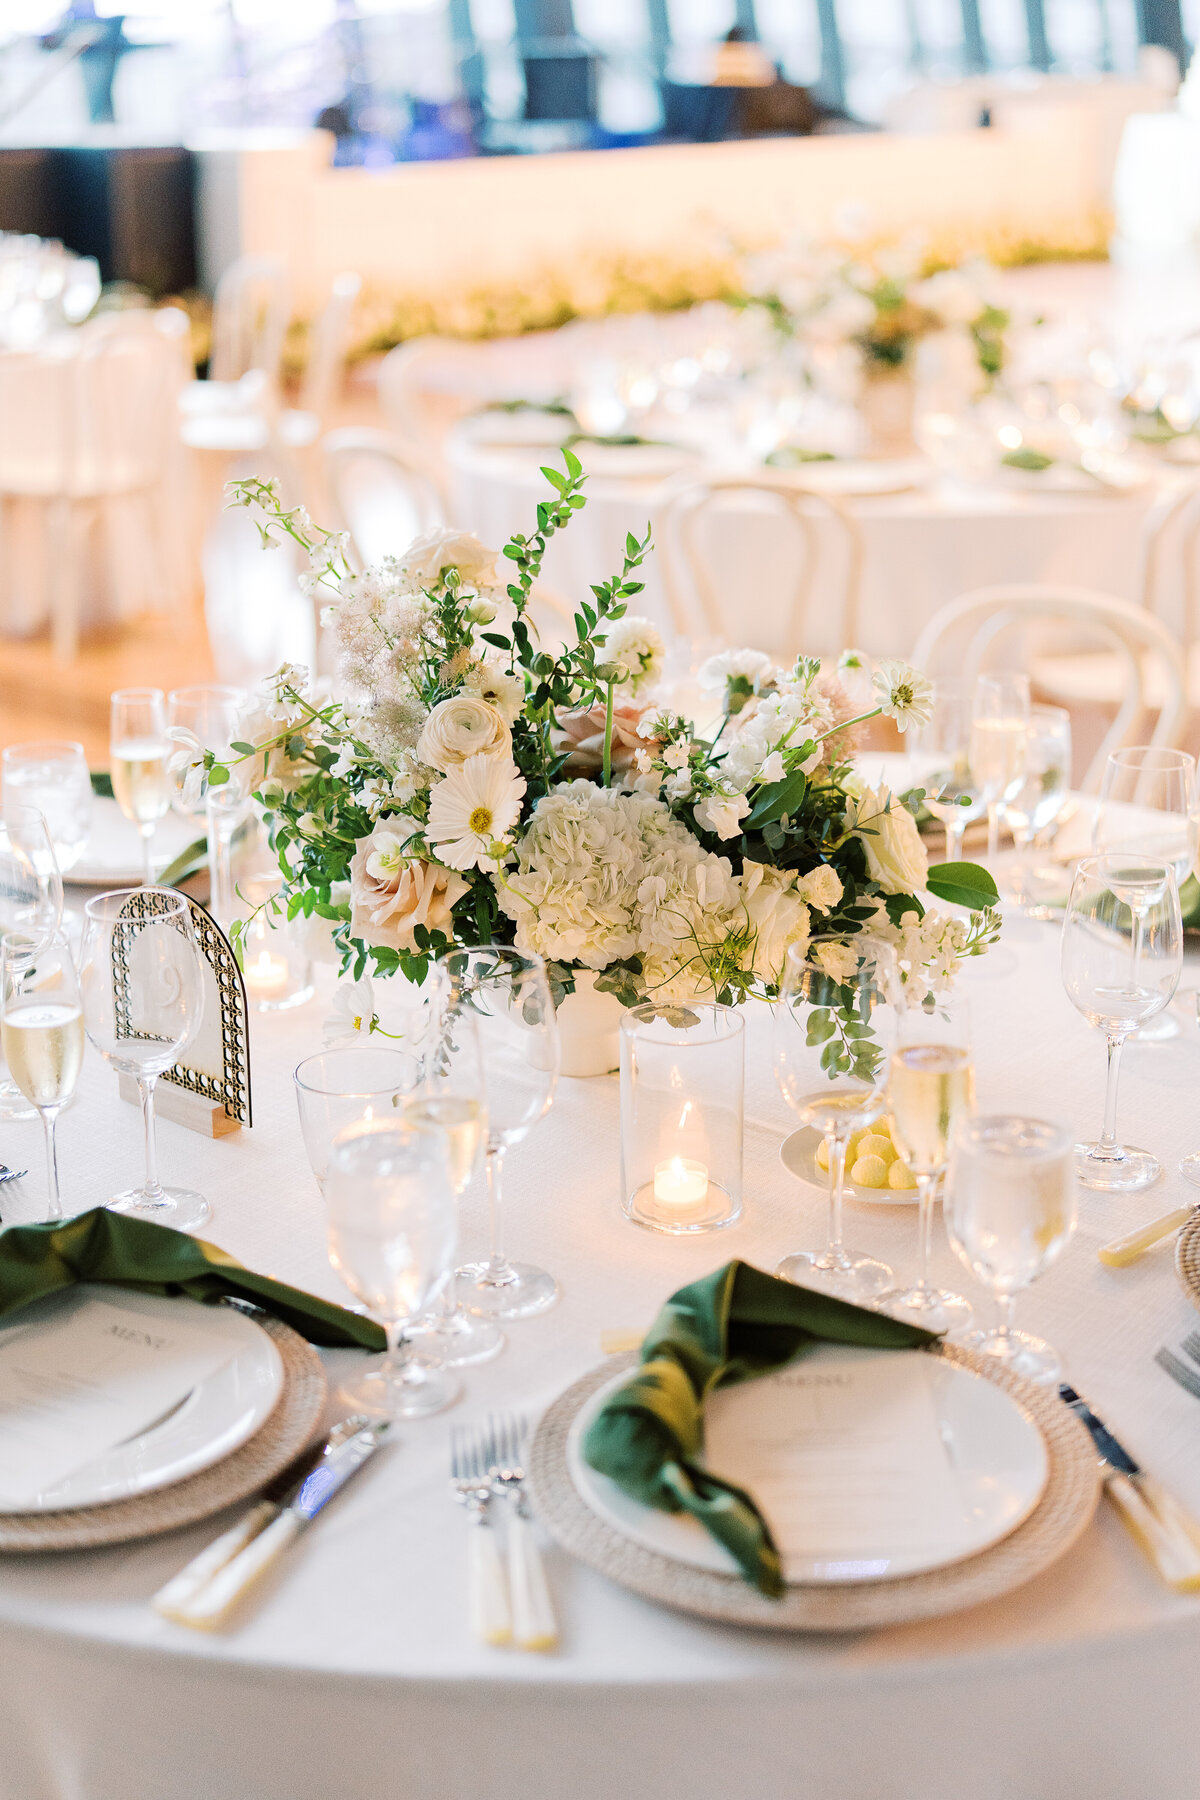 Lush low centerpieces for timeless garden wedding in downtown Nashville. Summer wedding florals in colors of white, cream, green, and taupe. Summer floral design full of roses, ranunculus, hydrangea, cosmos, and lisianthis. Design by Rosemary & Finch Floral Design in Nashville, TN.